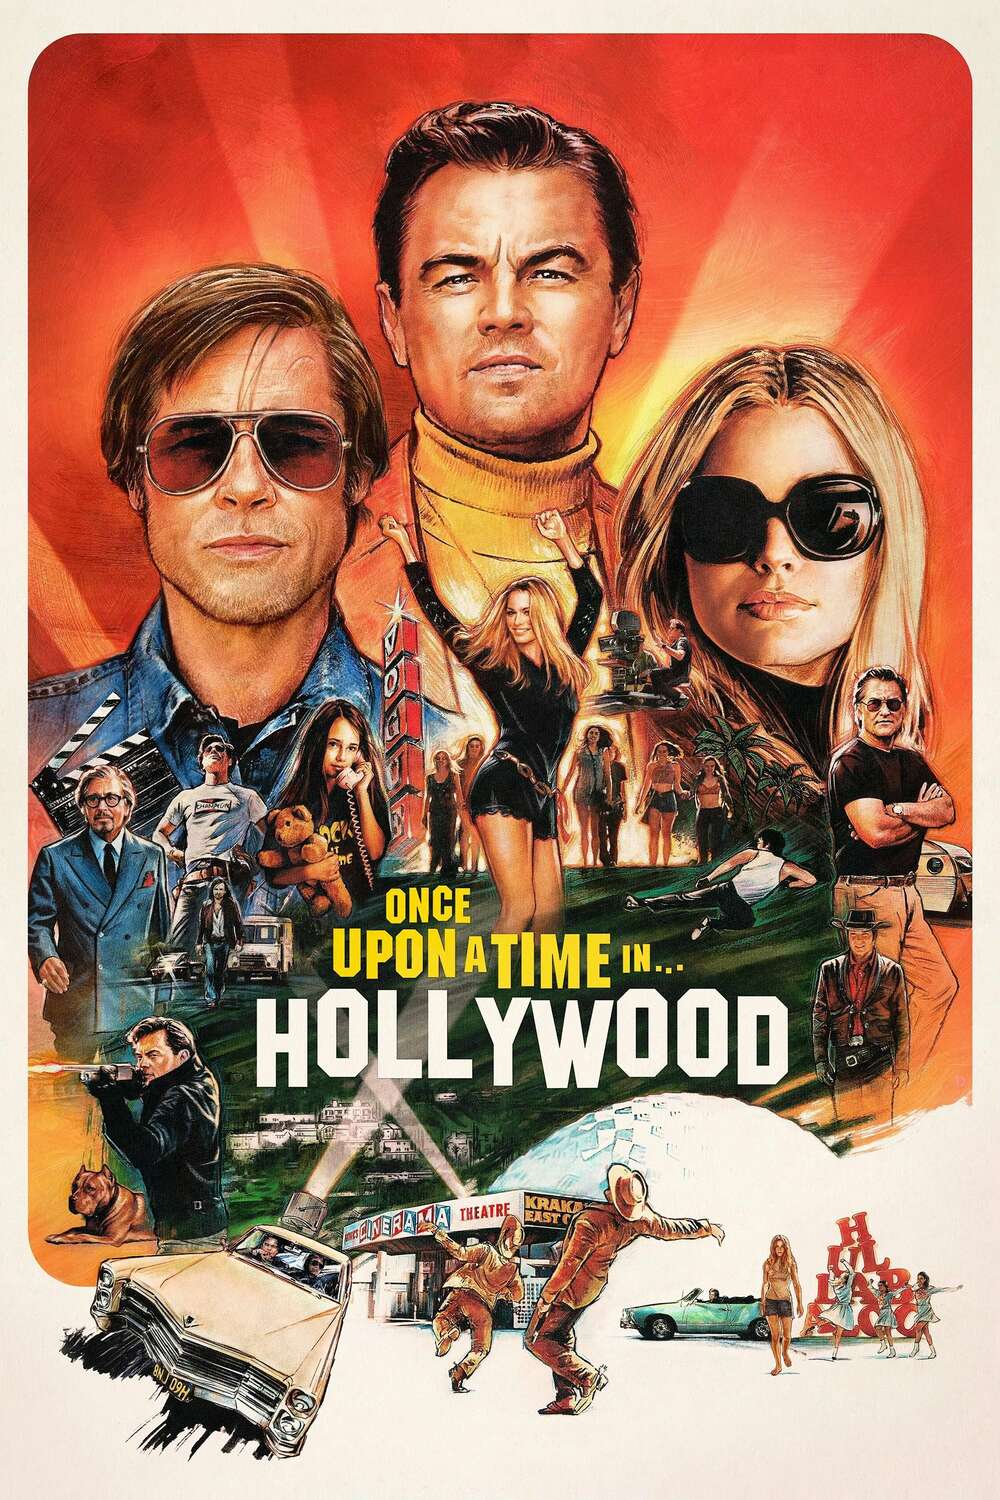 397859-once-upon-a-time-in-hollywood-0-1000-0-1500-crop.jpg